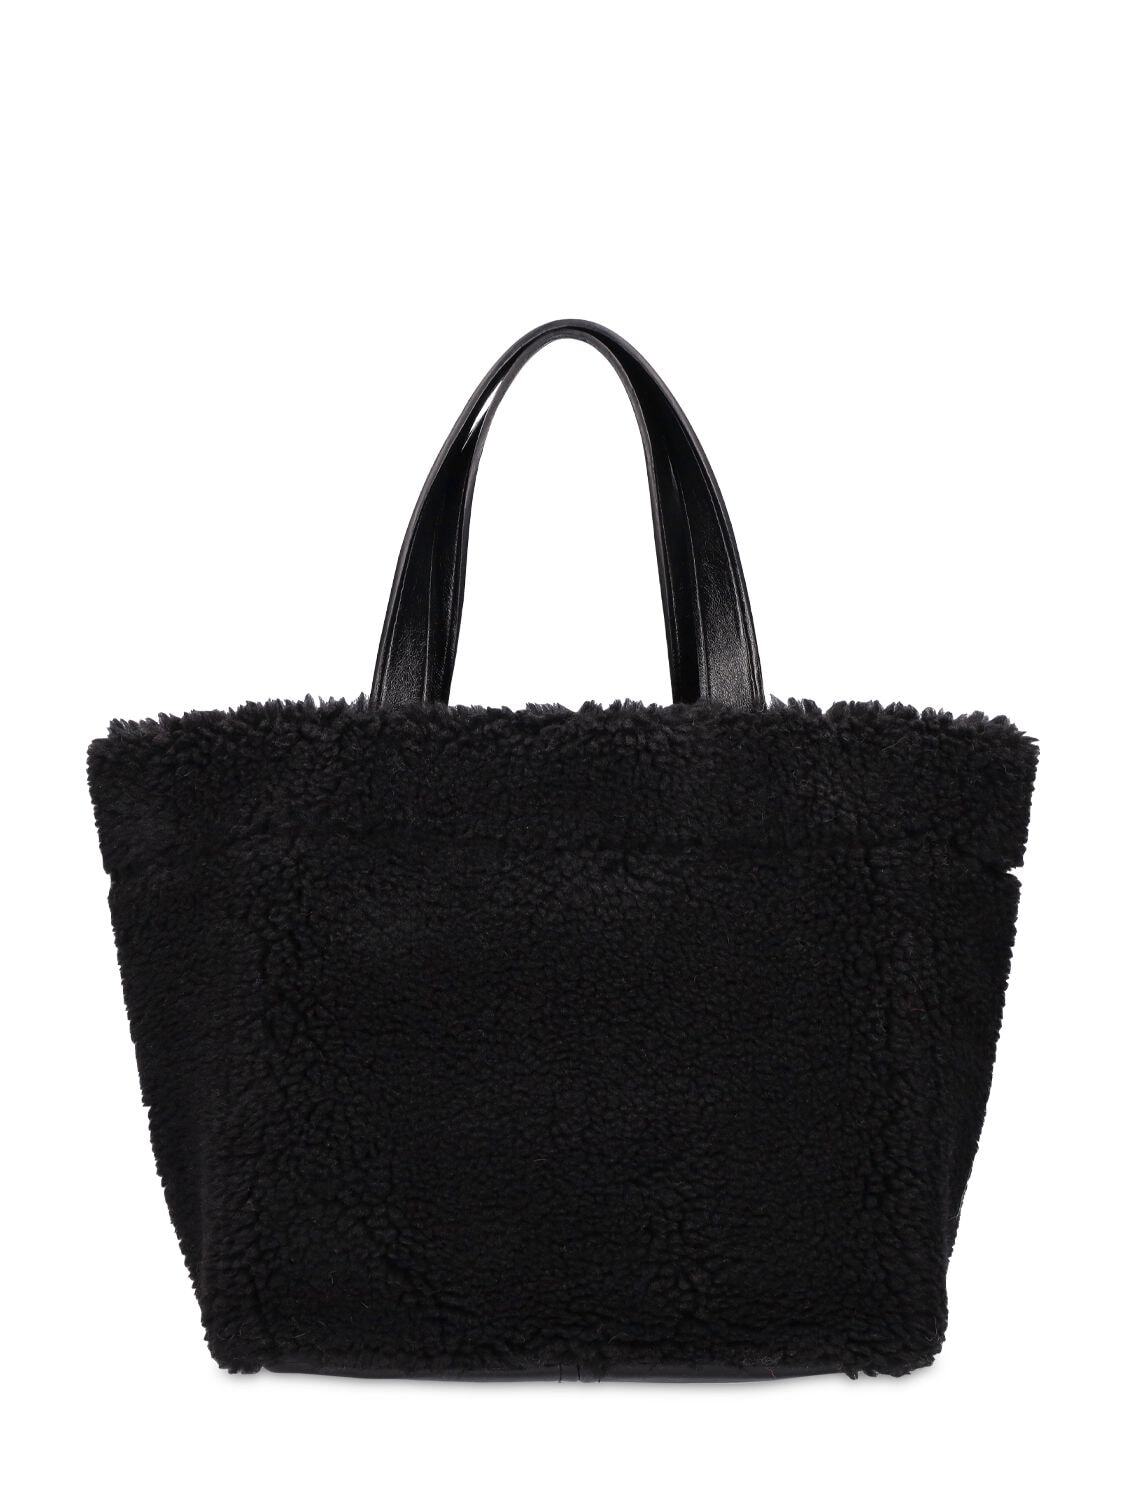 STAND STUDIO Small Faux Shearling Teddy Shopping Bag in black